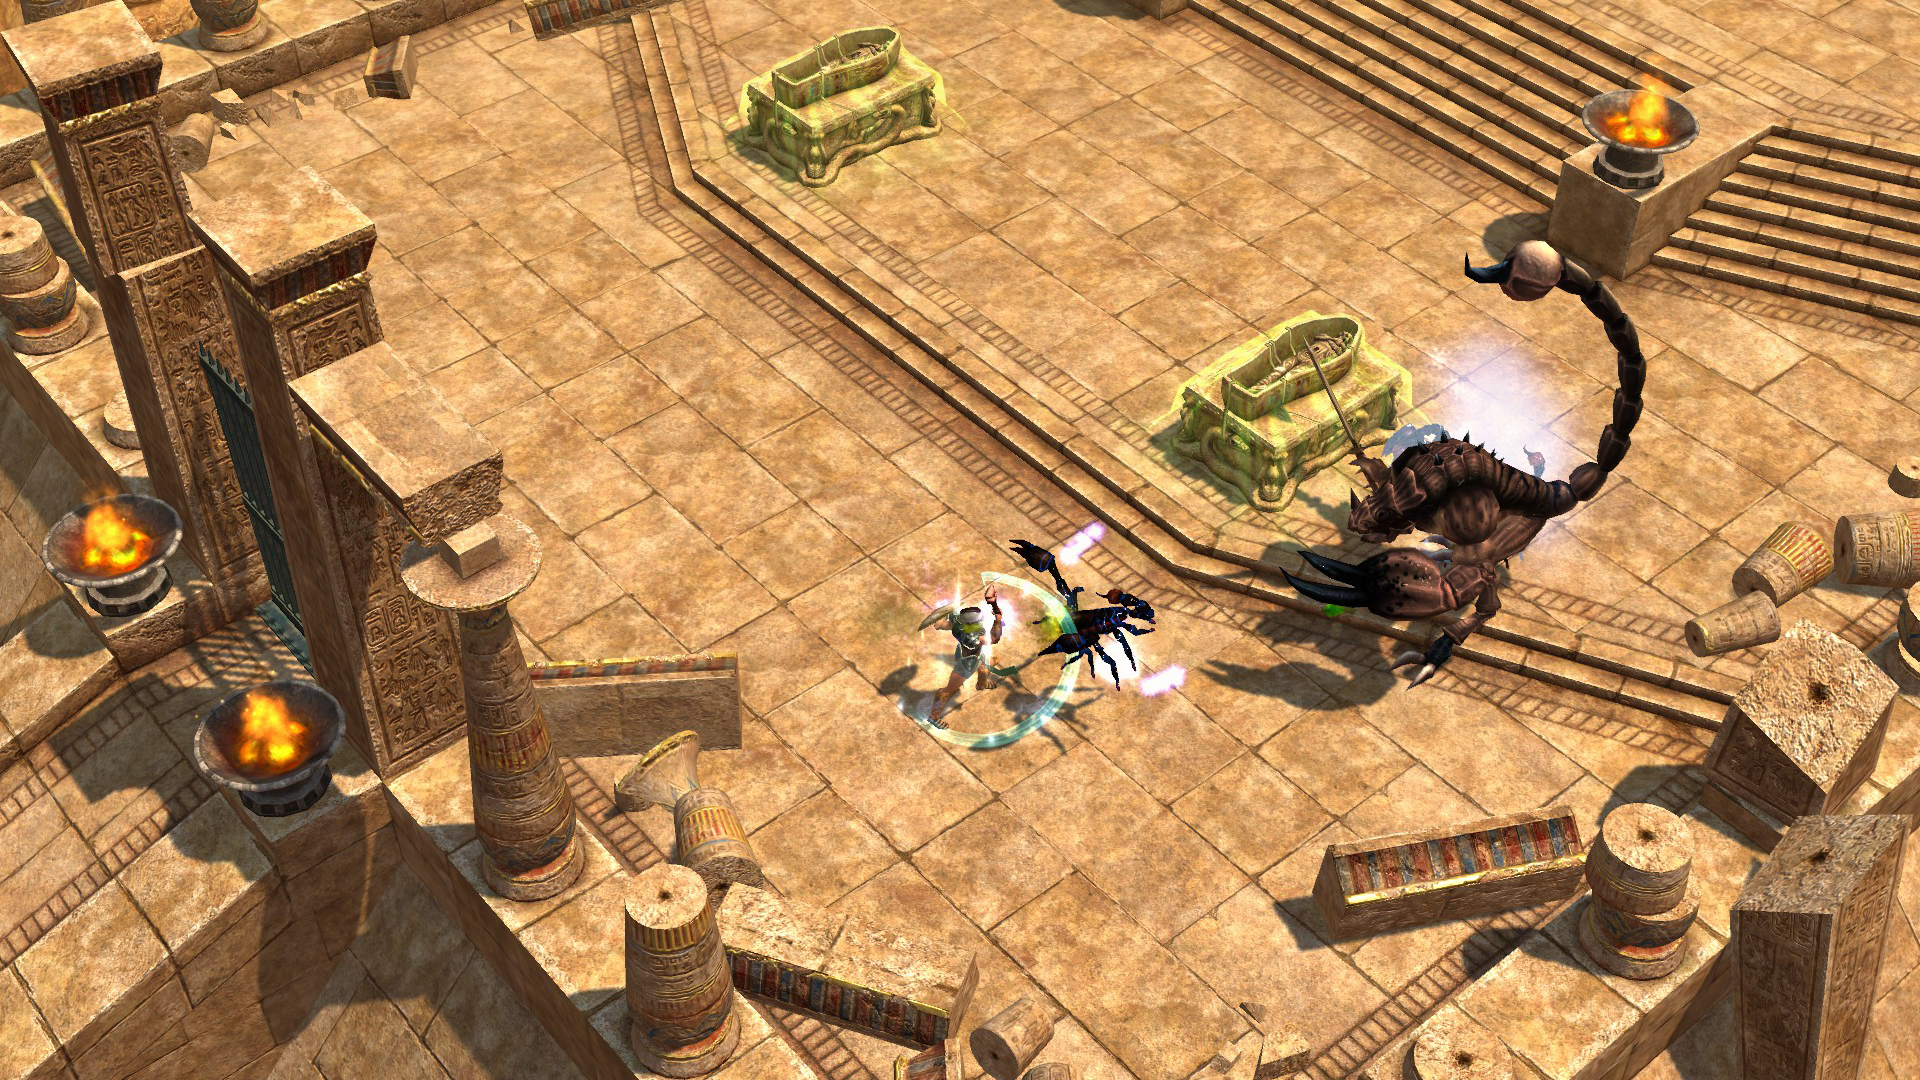 Save 75% on Titan Quest Anniversary Edition on Steam